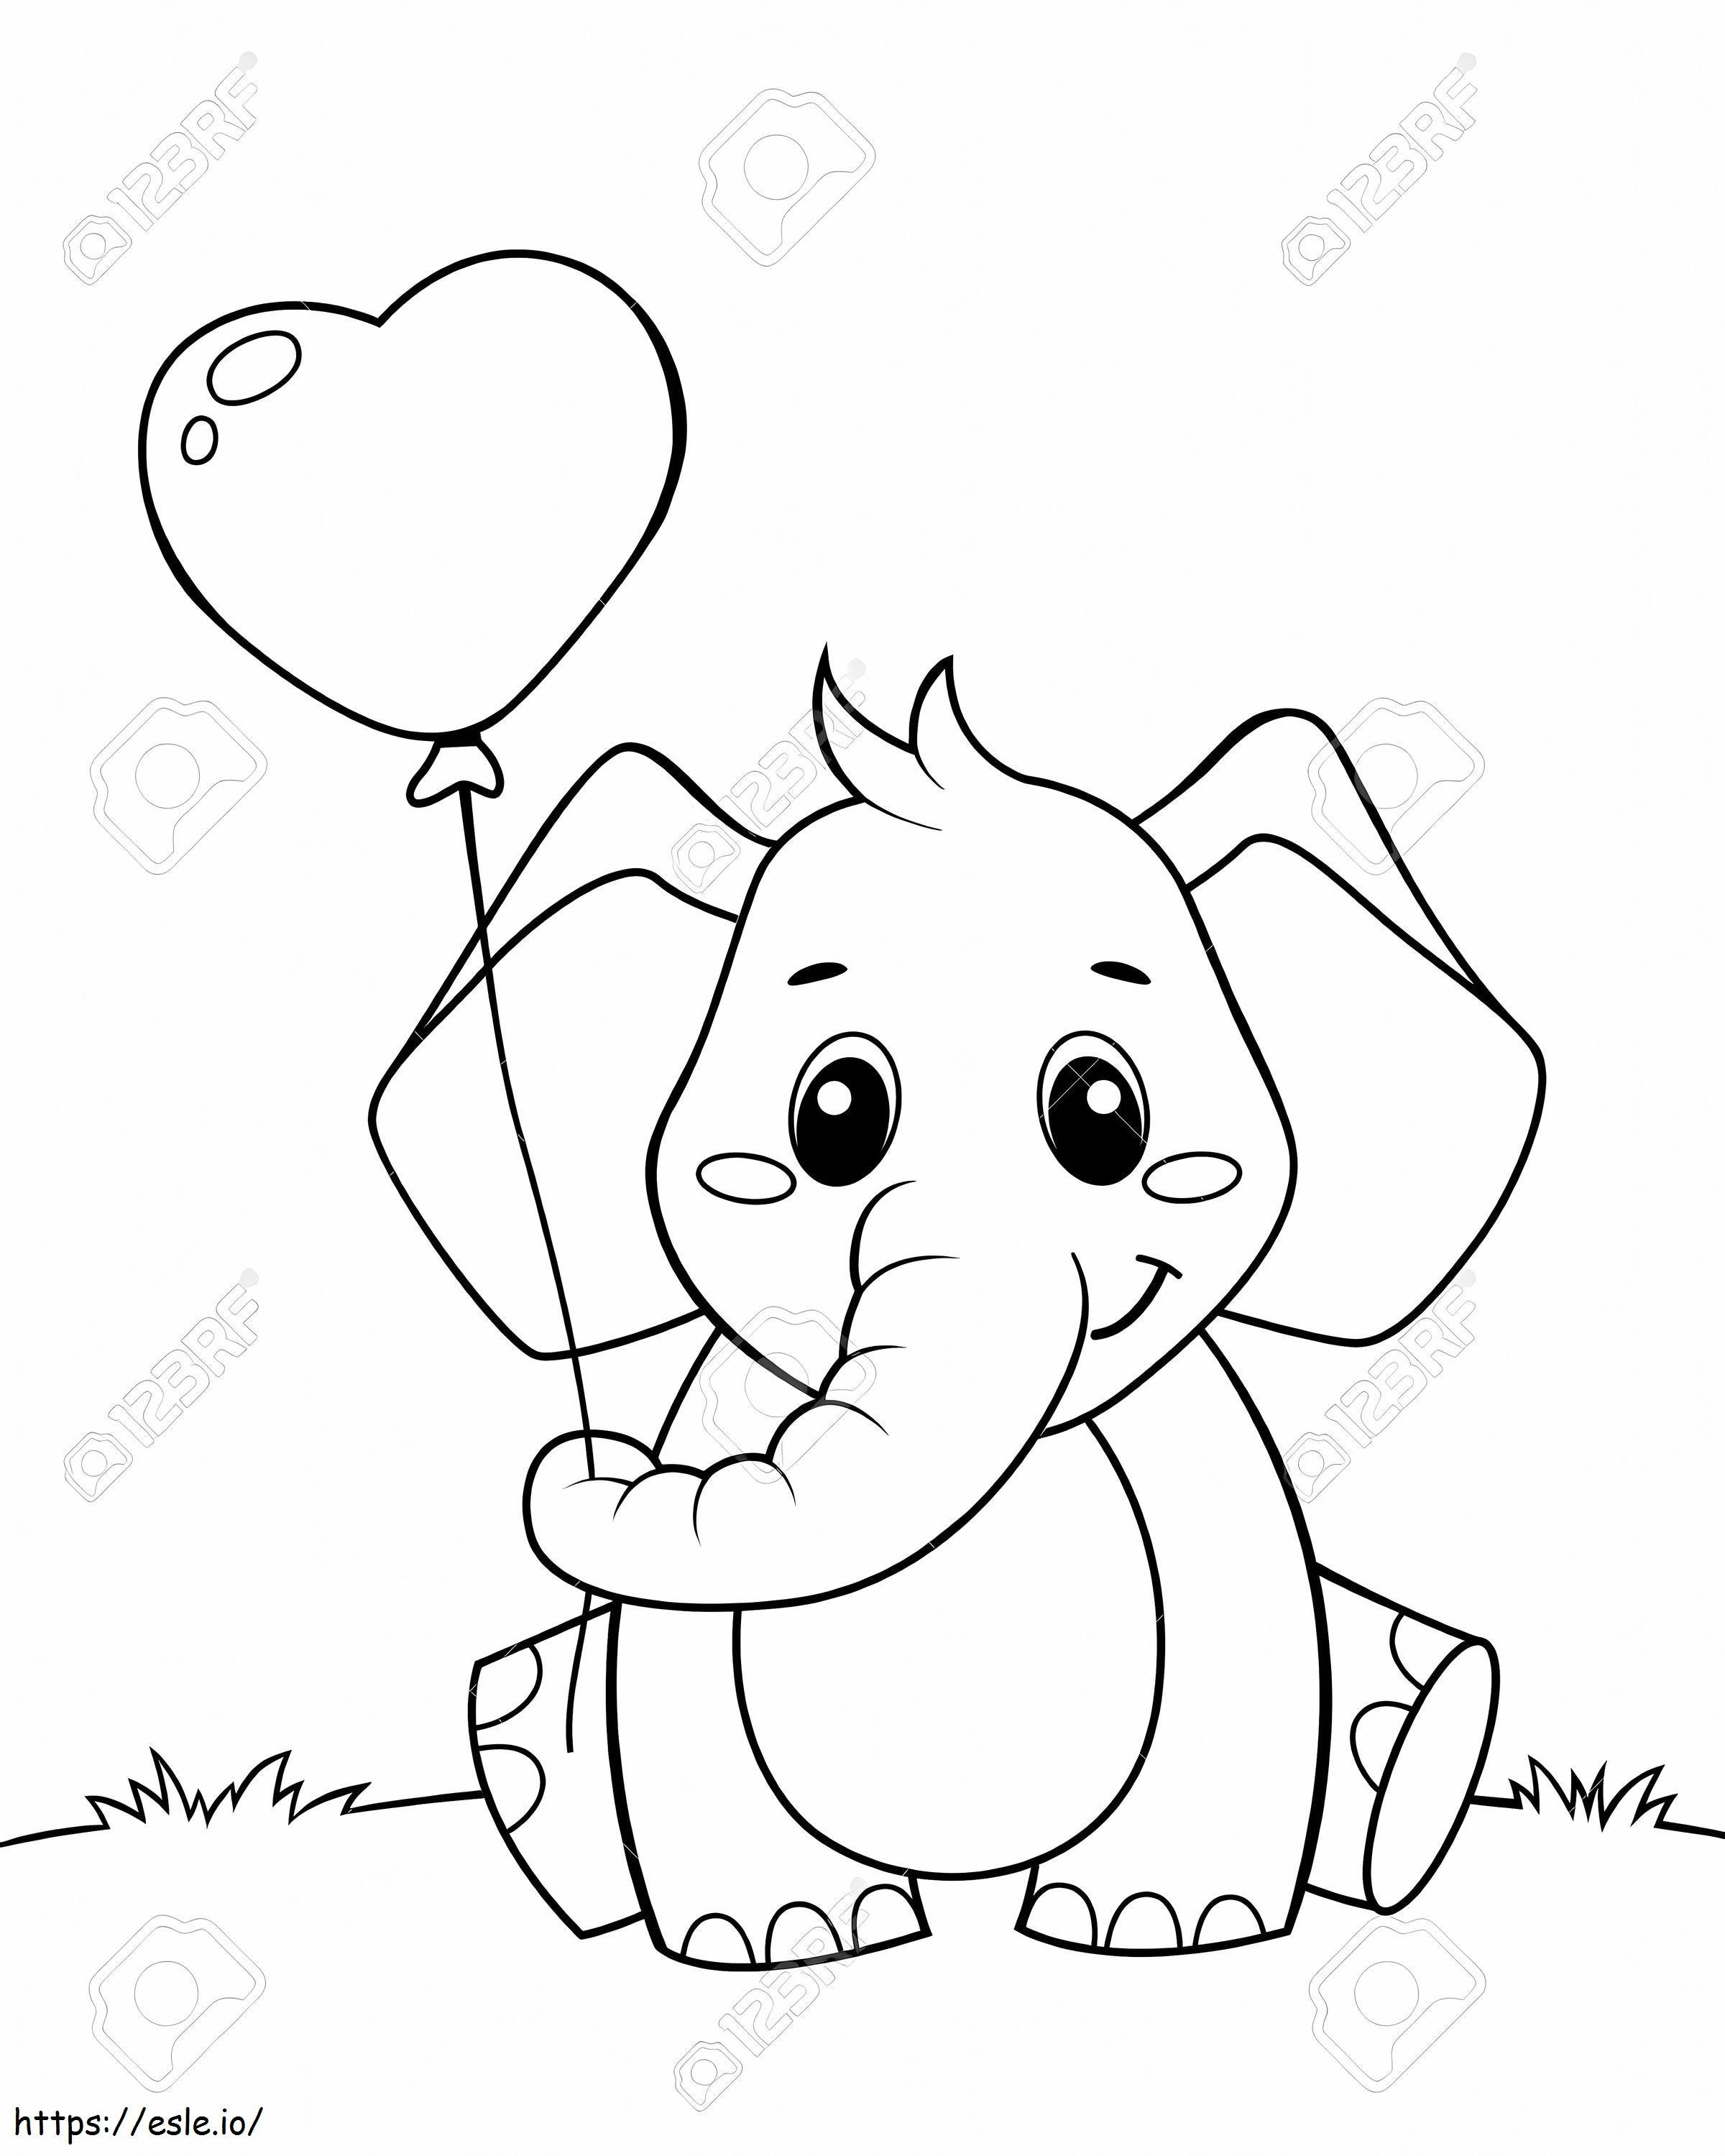 Cute Little Elephant Holding Balloon In Heart Form Black And White Vector Illustration For Coloring coloring page